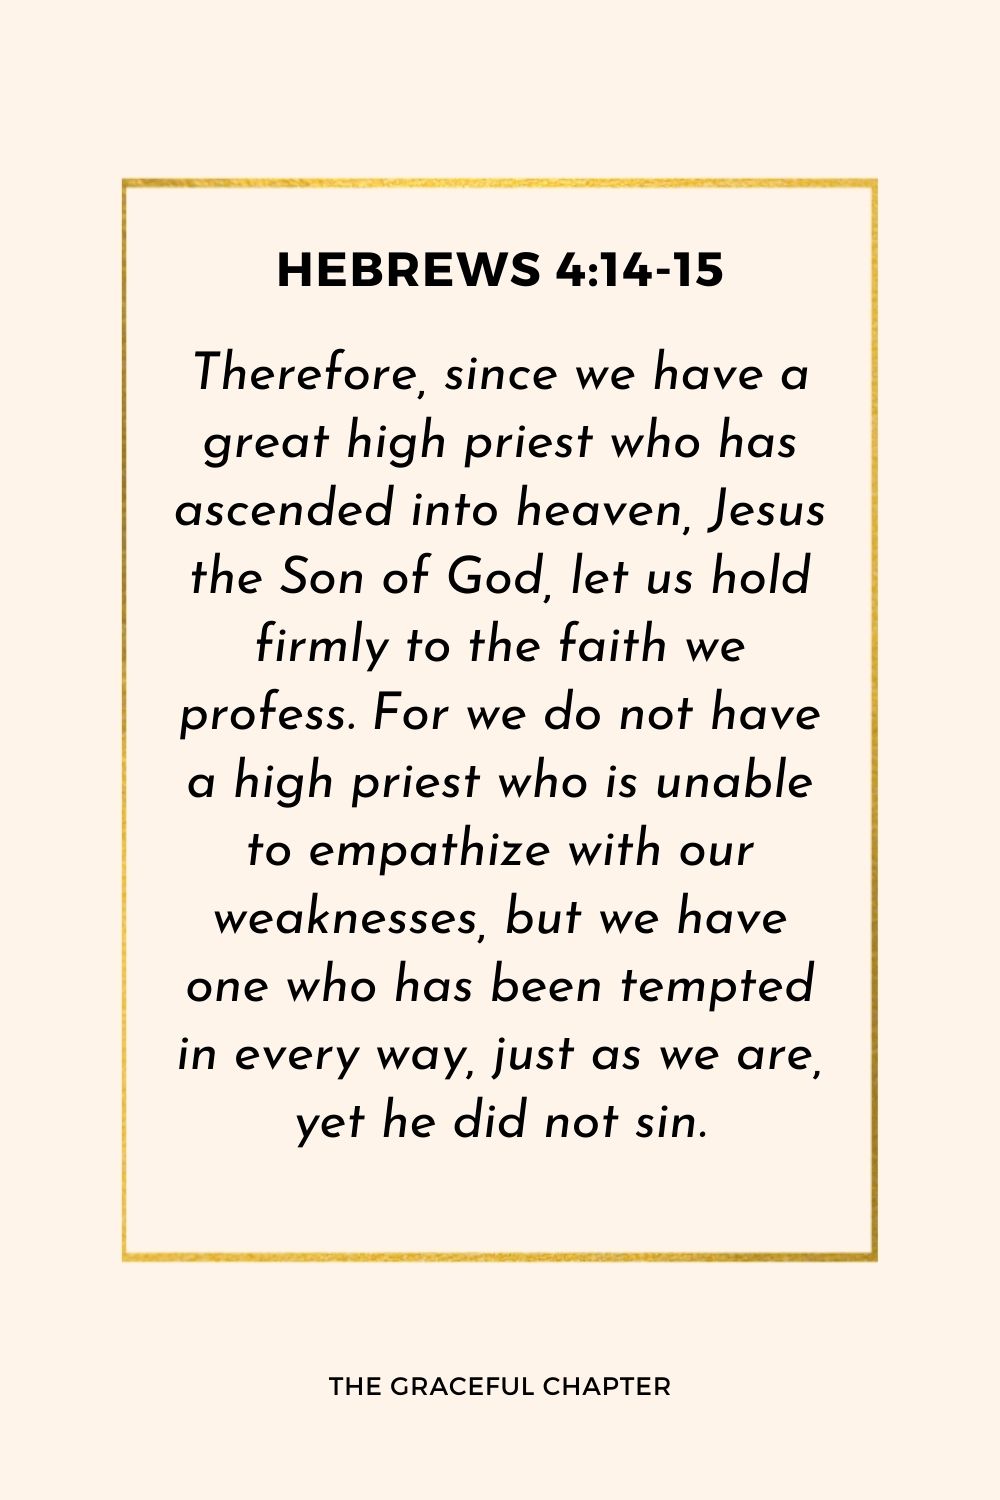 Therefore, since we have a great high priest who has ascended into heaven, Jesus the Son of God, let us hold firmly to the faith we profess. For we do not have a high priest who is unable to empathize with our weaknesses, but we have one who has been tempted in every way, just as we are, yet he did not sin.